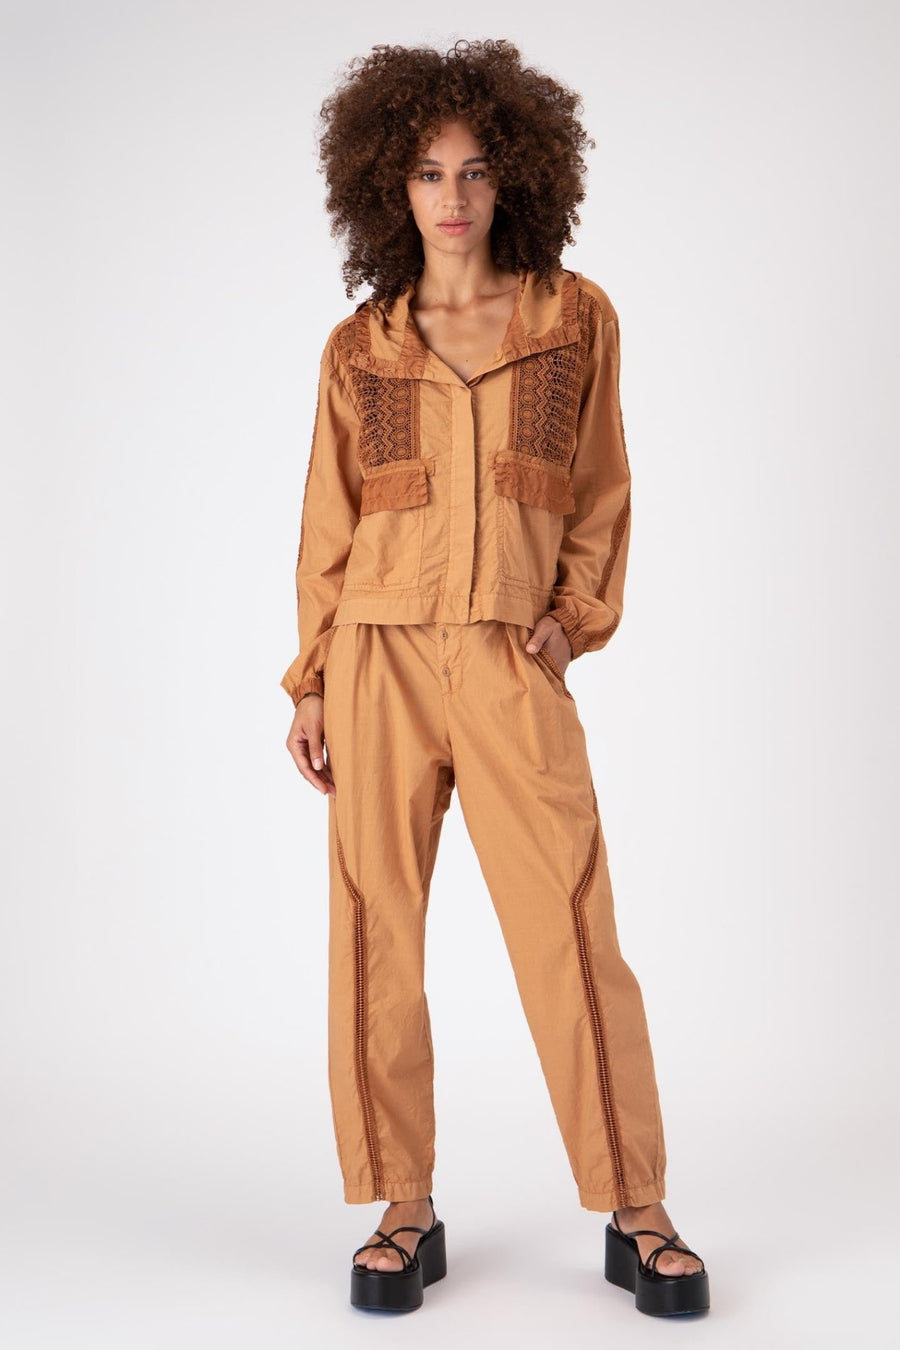 ALEXANDRIA TROUSERS, AMBER - Burning Torch Online Boutique